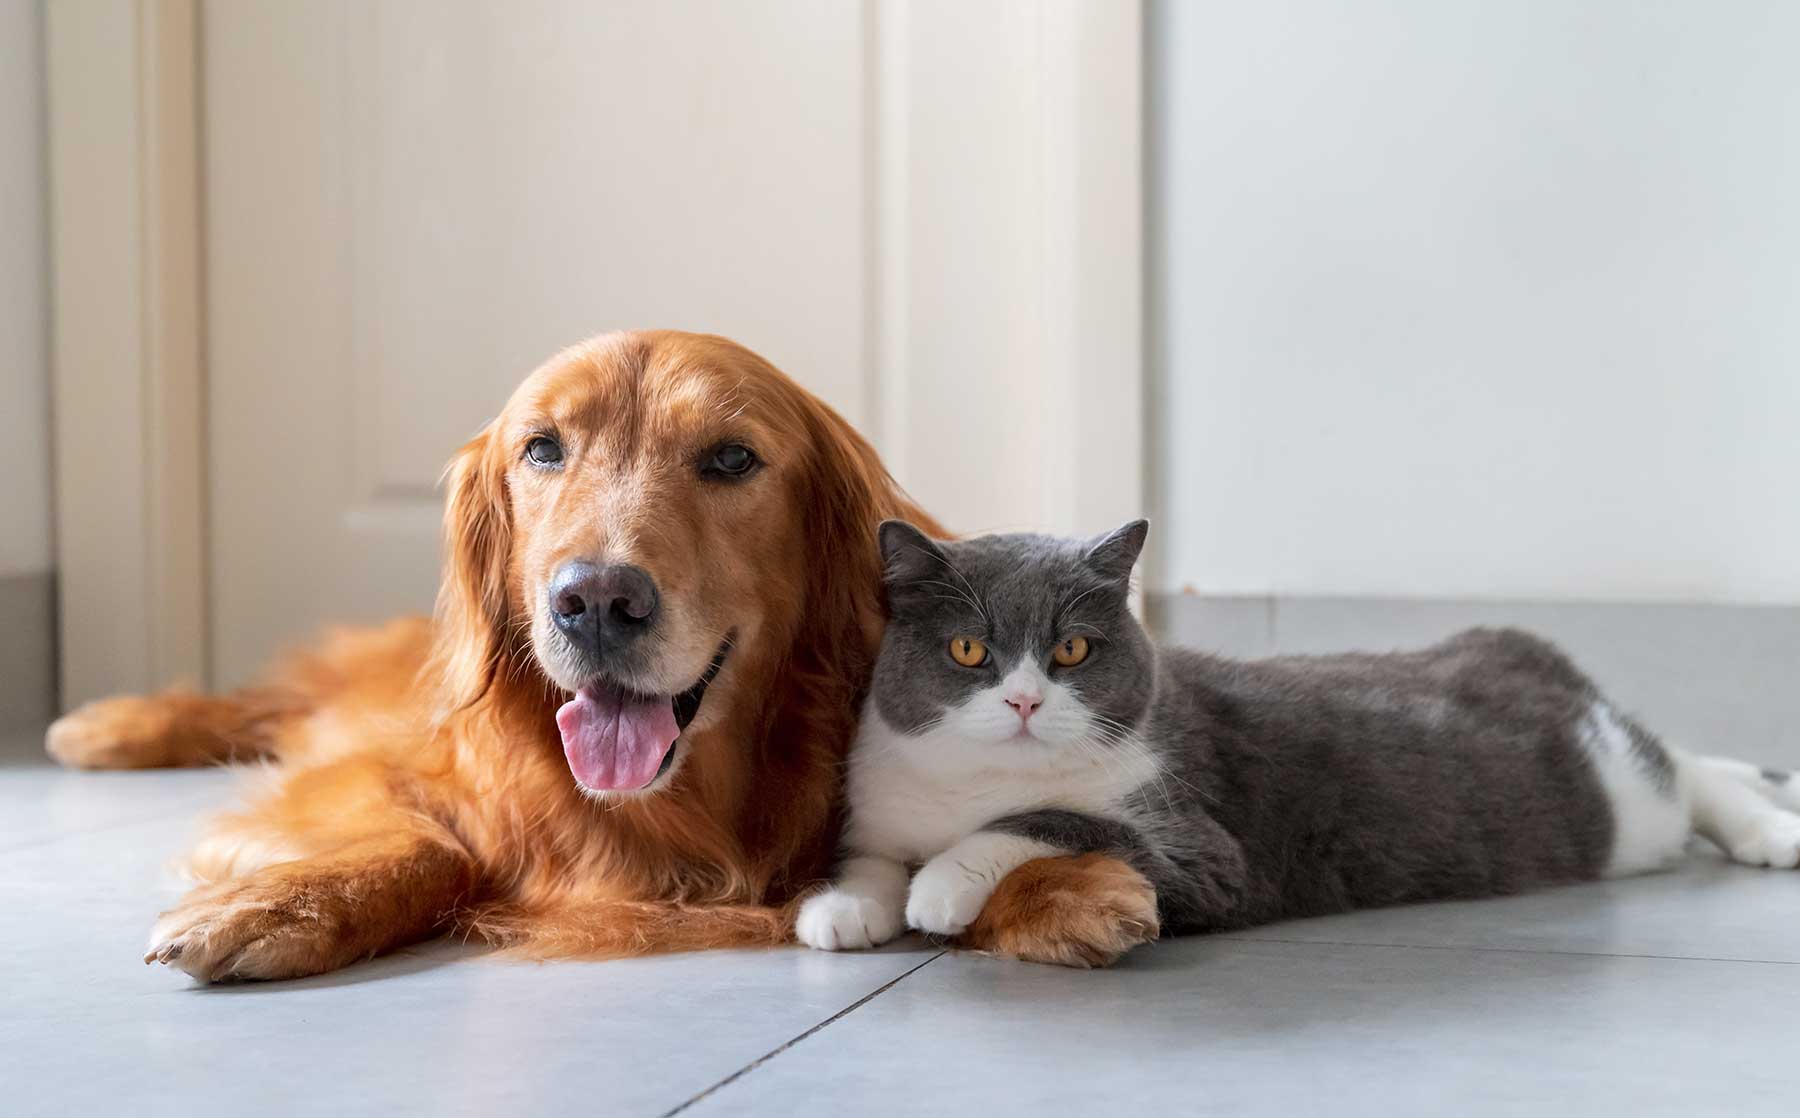 Debunking common myths about cats for better pet care. - Modkat